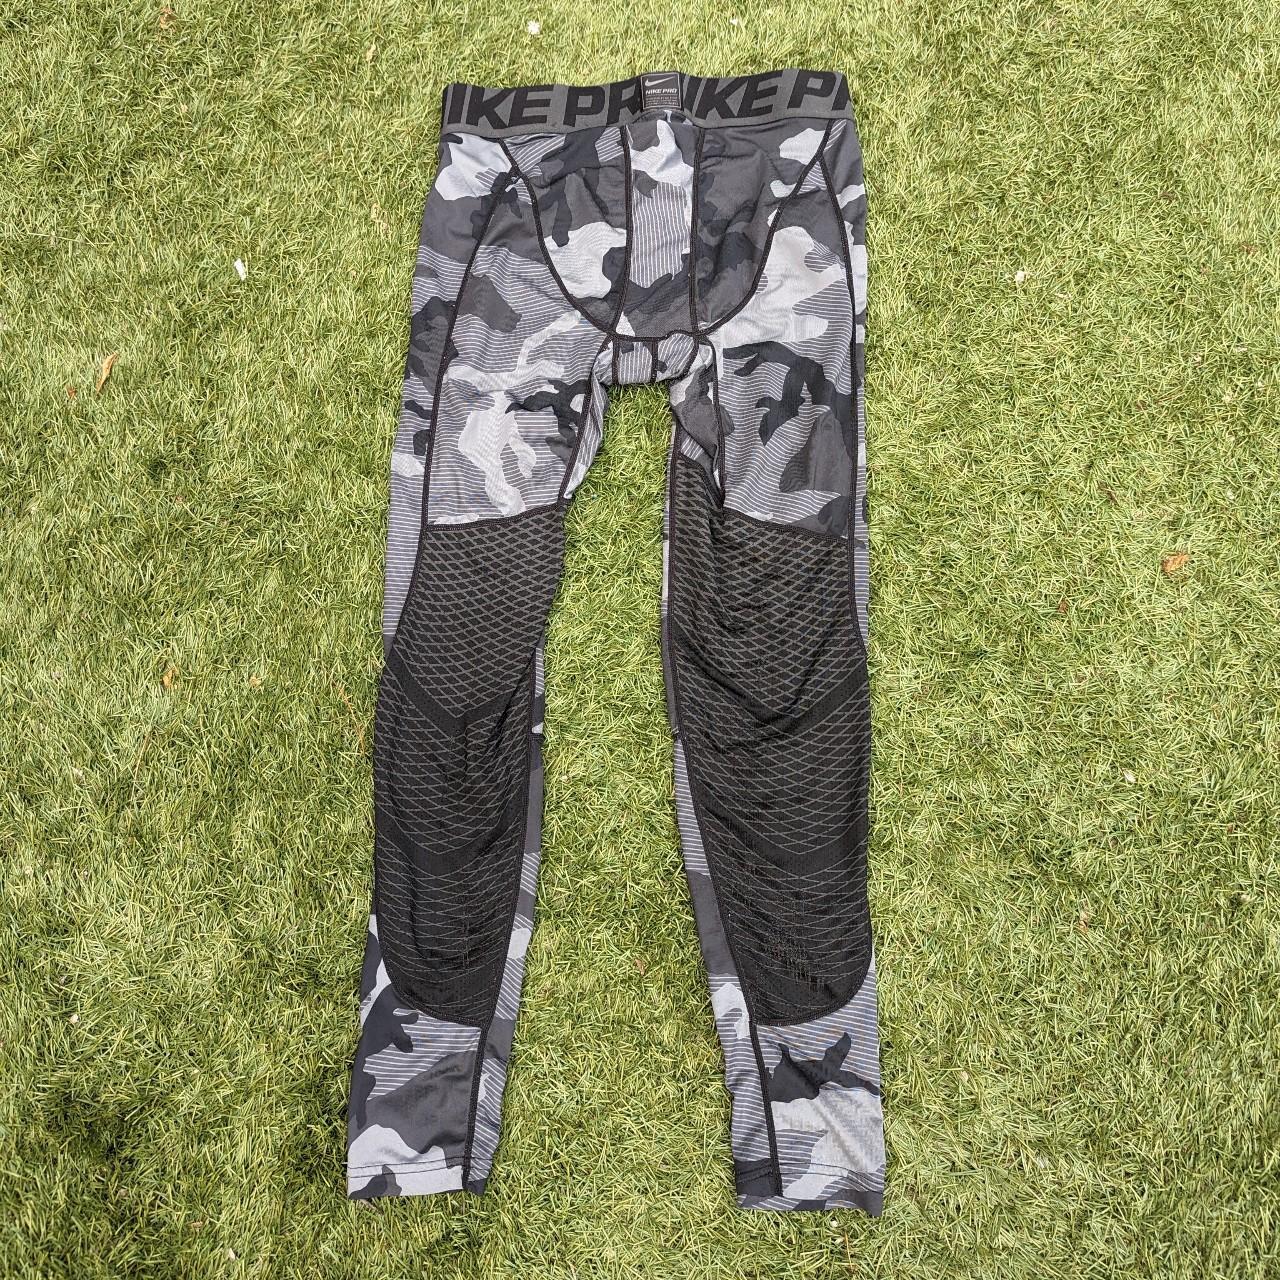 Nike Pro Mens Tight Fit Compression Tights Heather - Depop